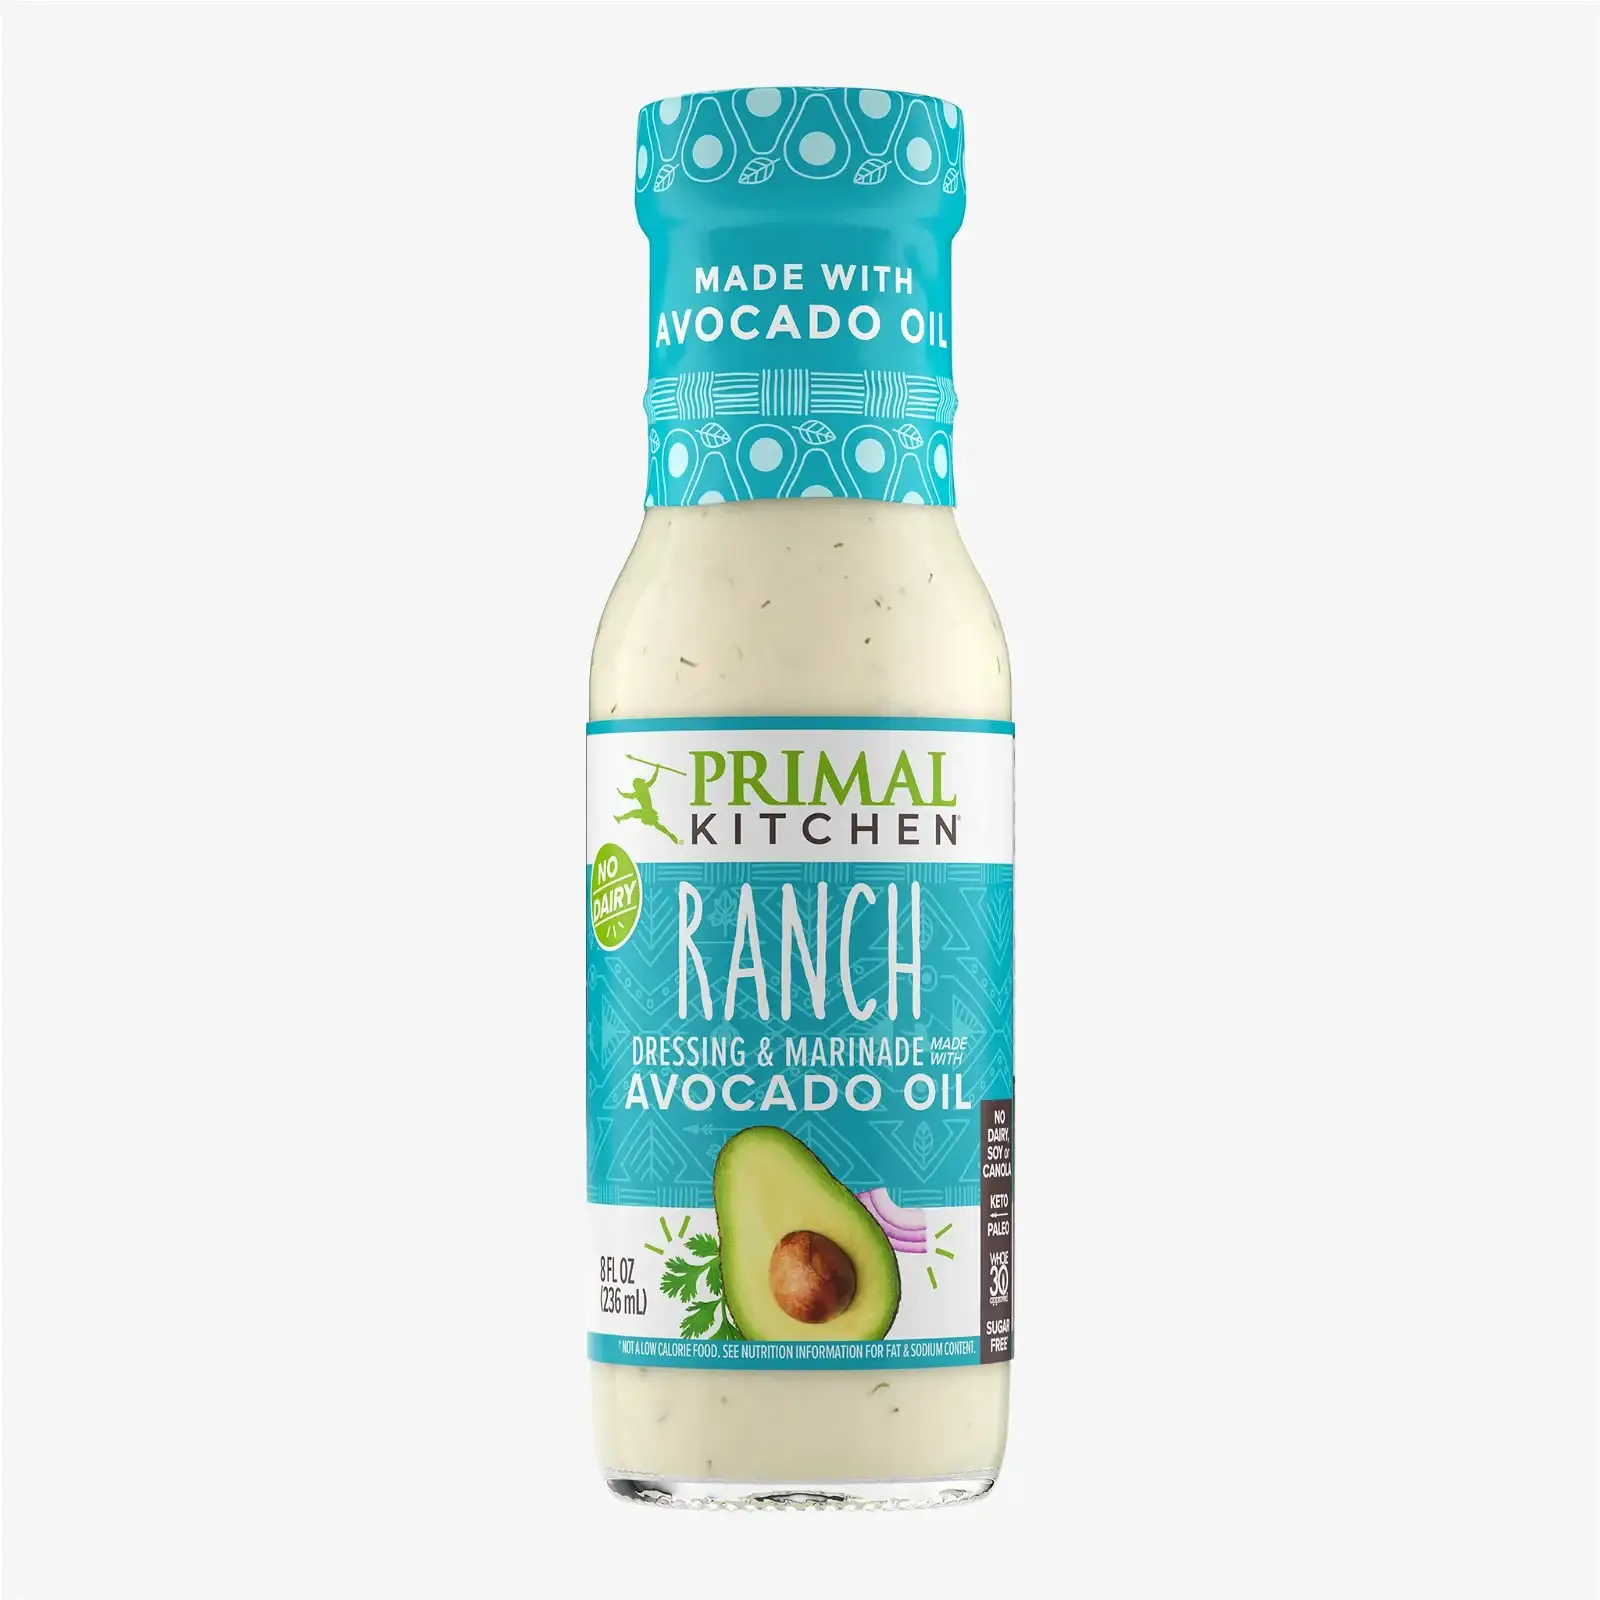 Image of Ranch Dressing